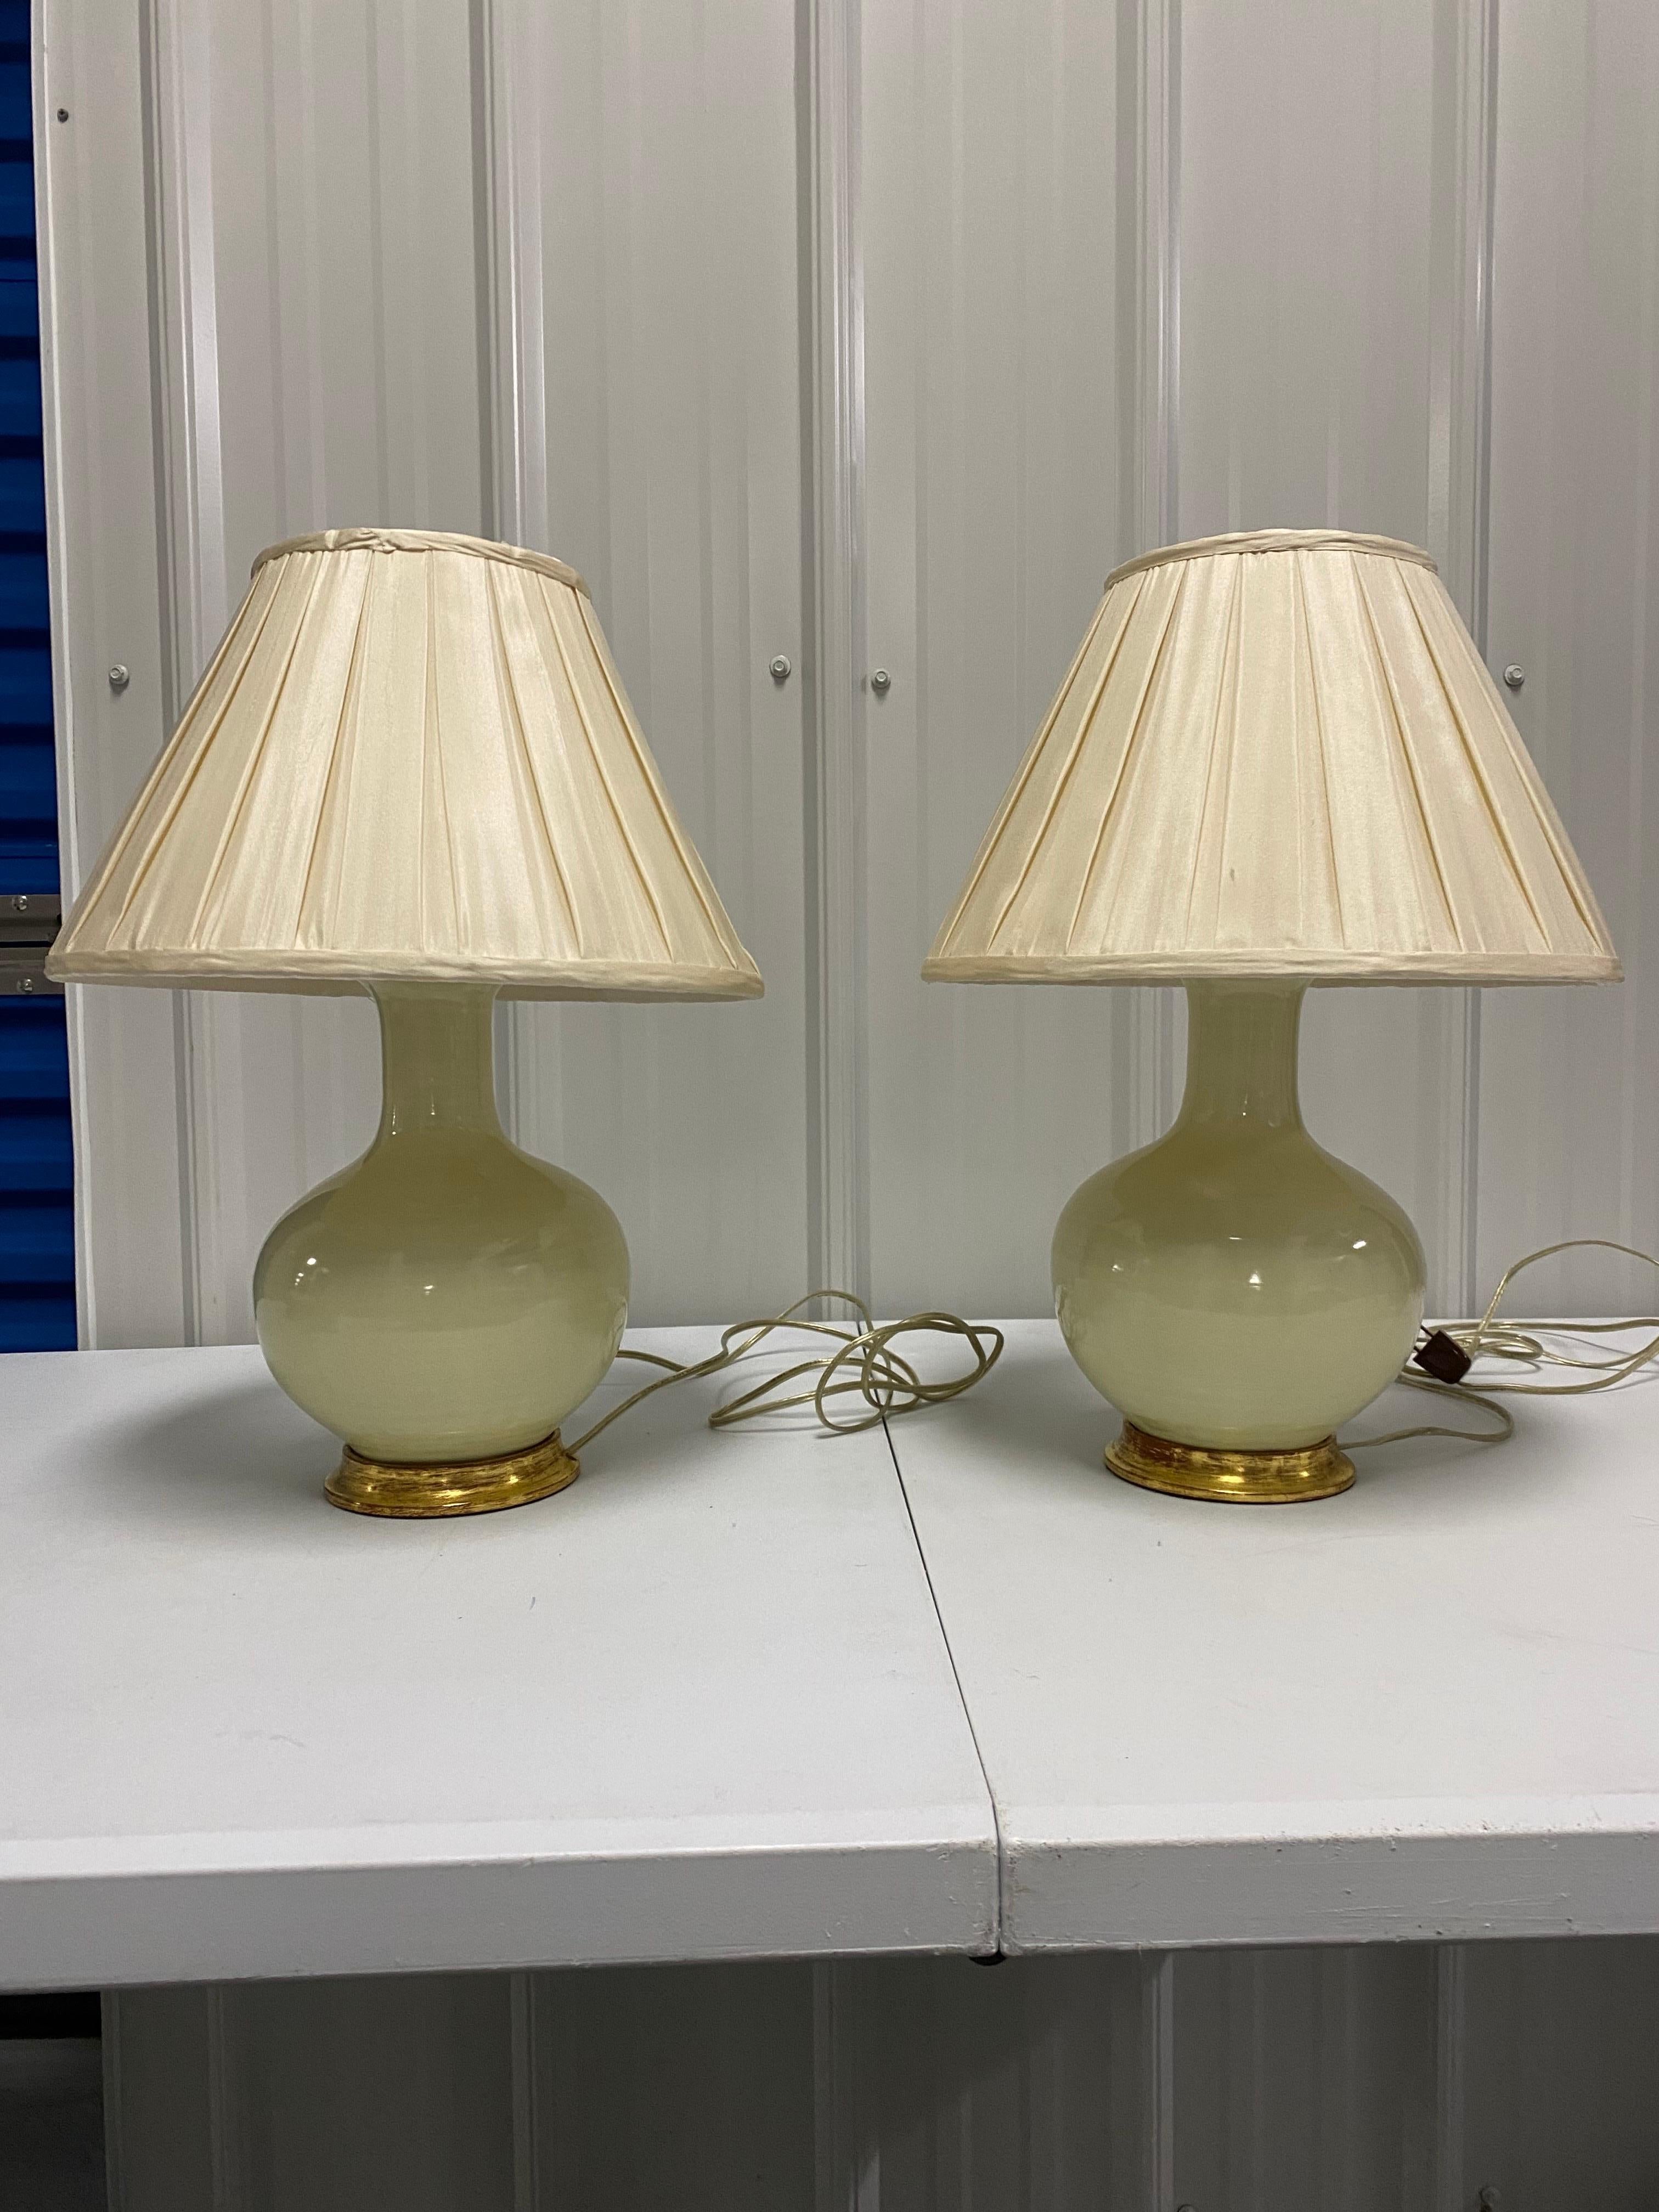 Pair of Lindsay Lamps in Sesame by Christopher Spitzmiller.
Hand thrown ceramic lamps in a classic smaller gourd form. All of Spitzmiller's lamps are made in excellent craftsmanship using quality materials for the fittings.  23k Gold Water Gilt